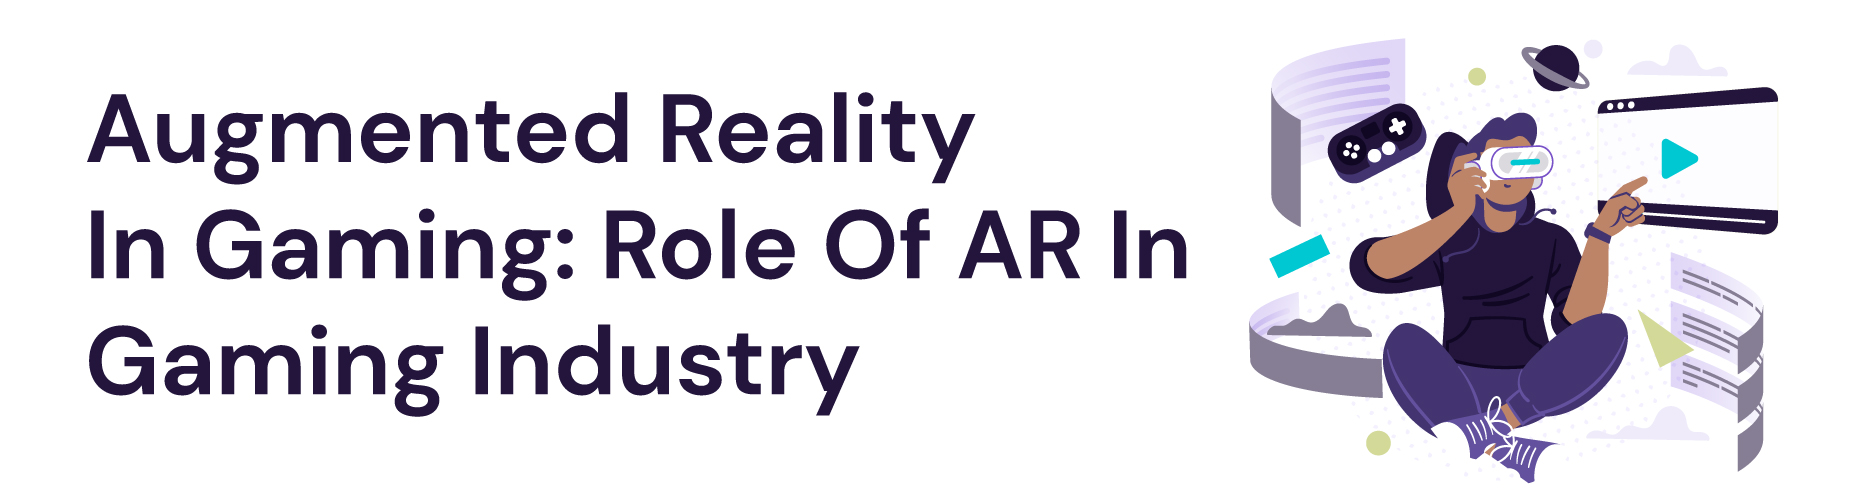 Augmented Reality In Gaming role of AR